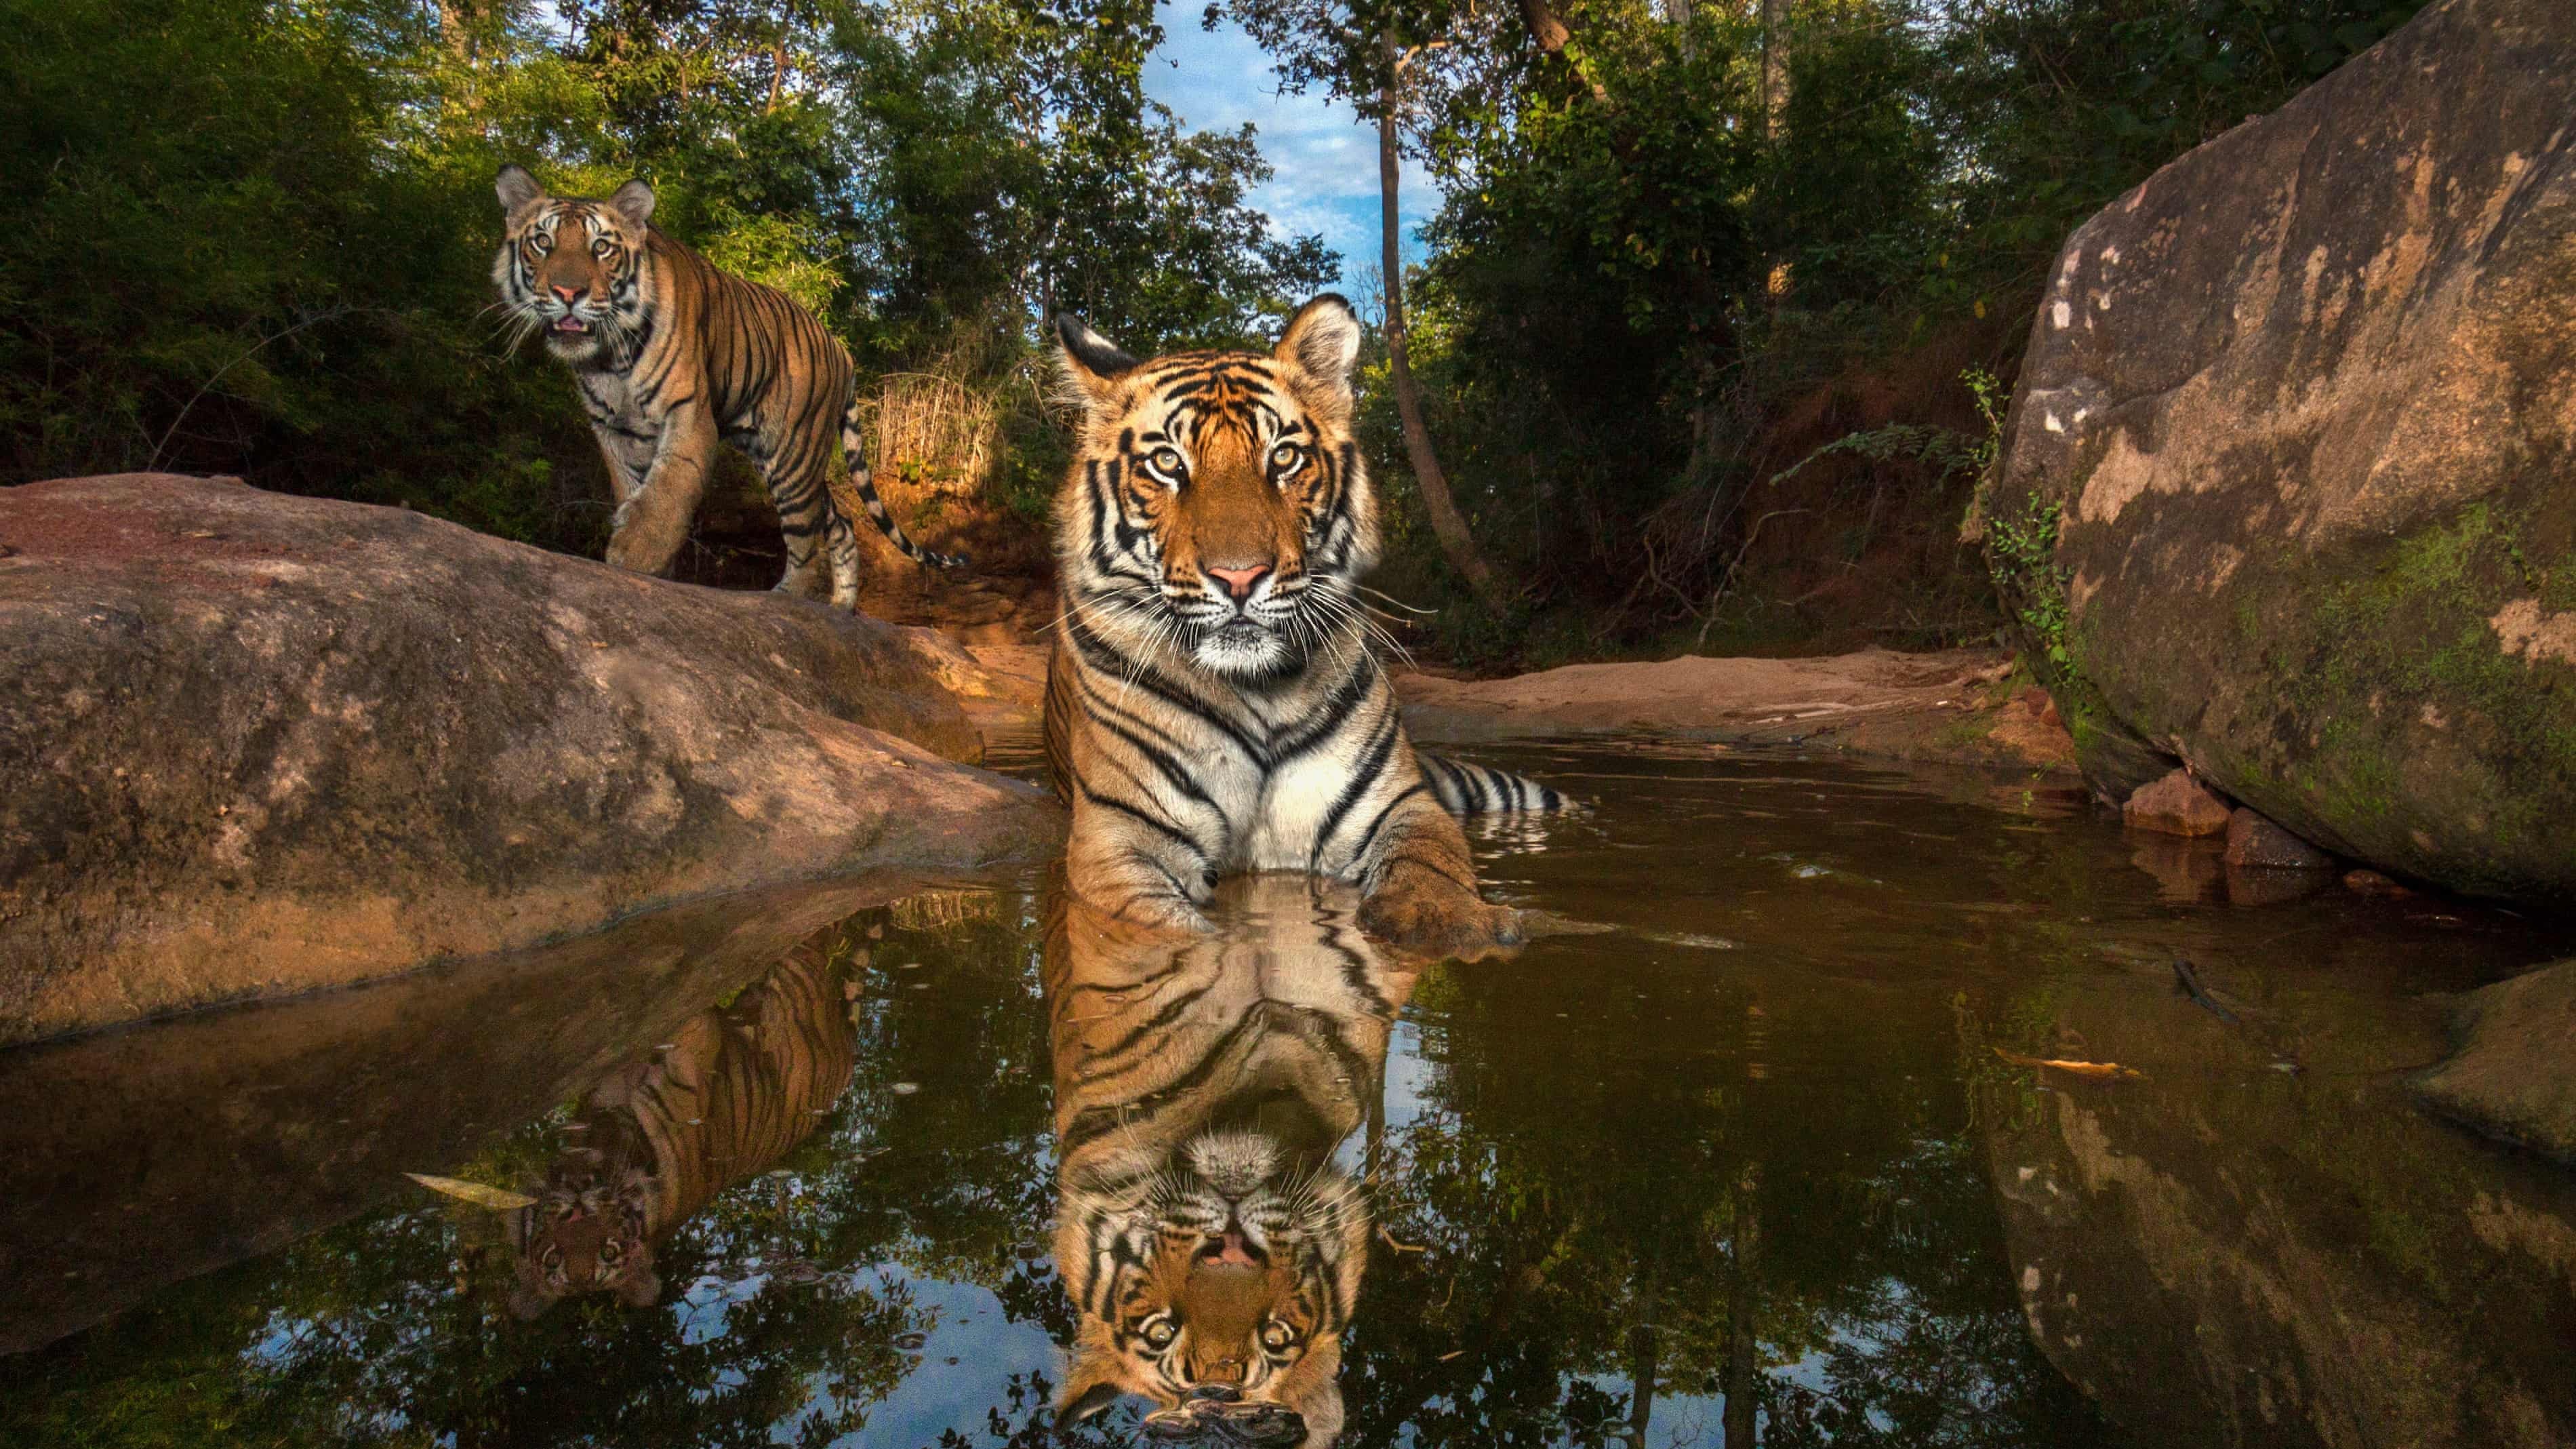 The world's largest tiger photography exhibition | Financial Times